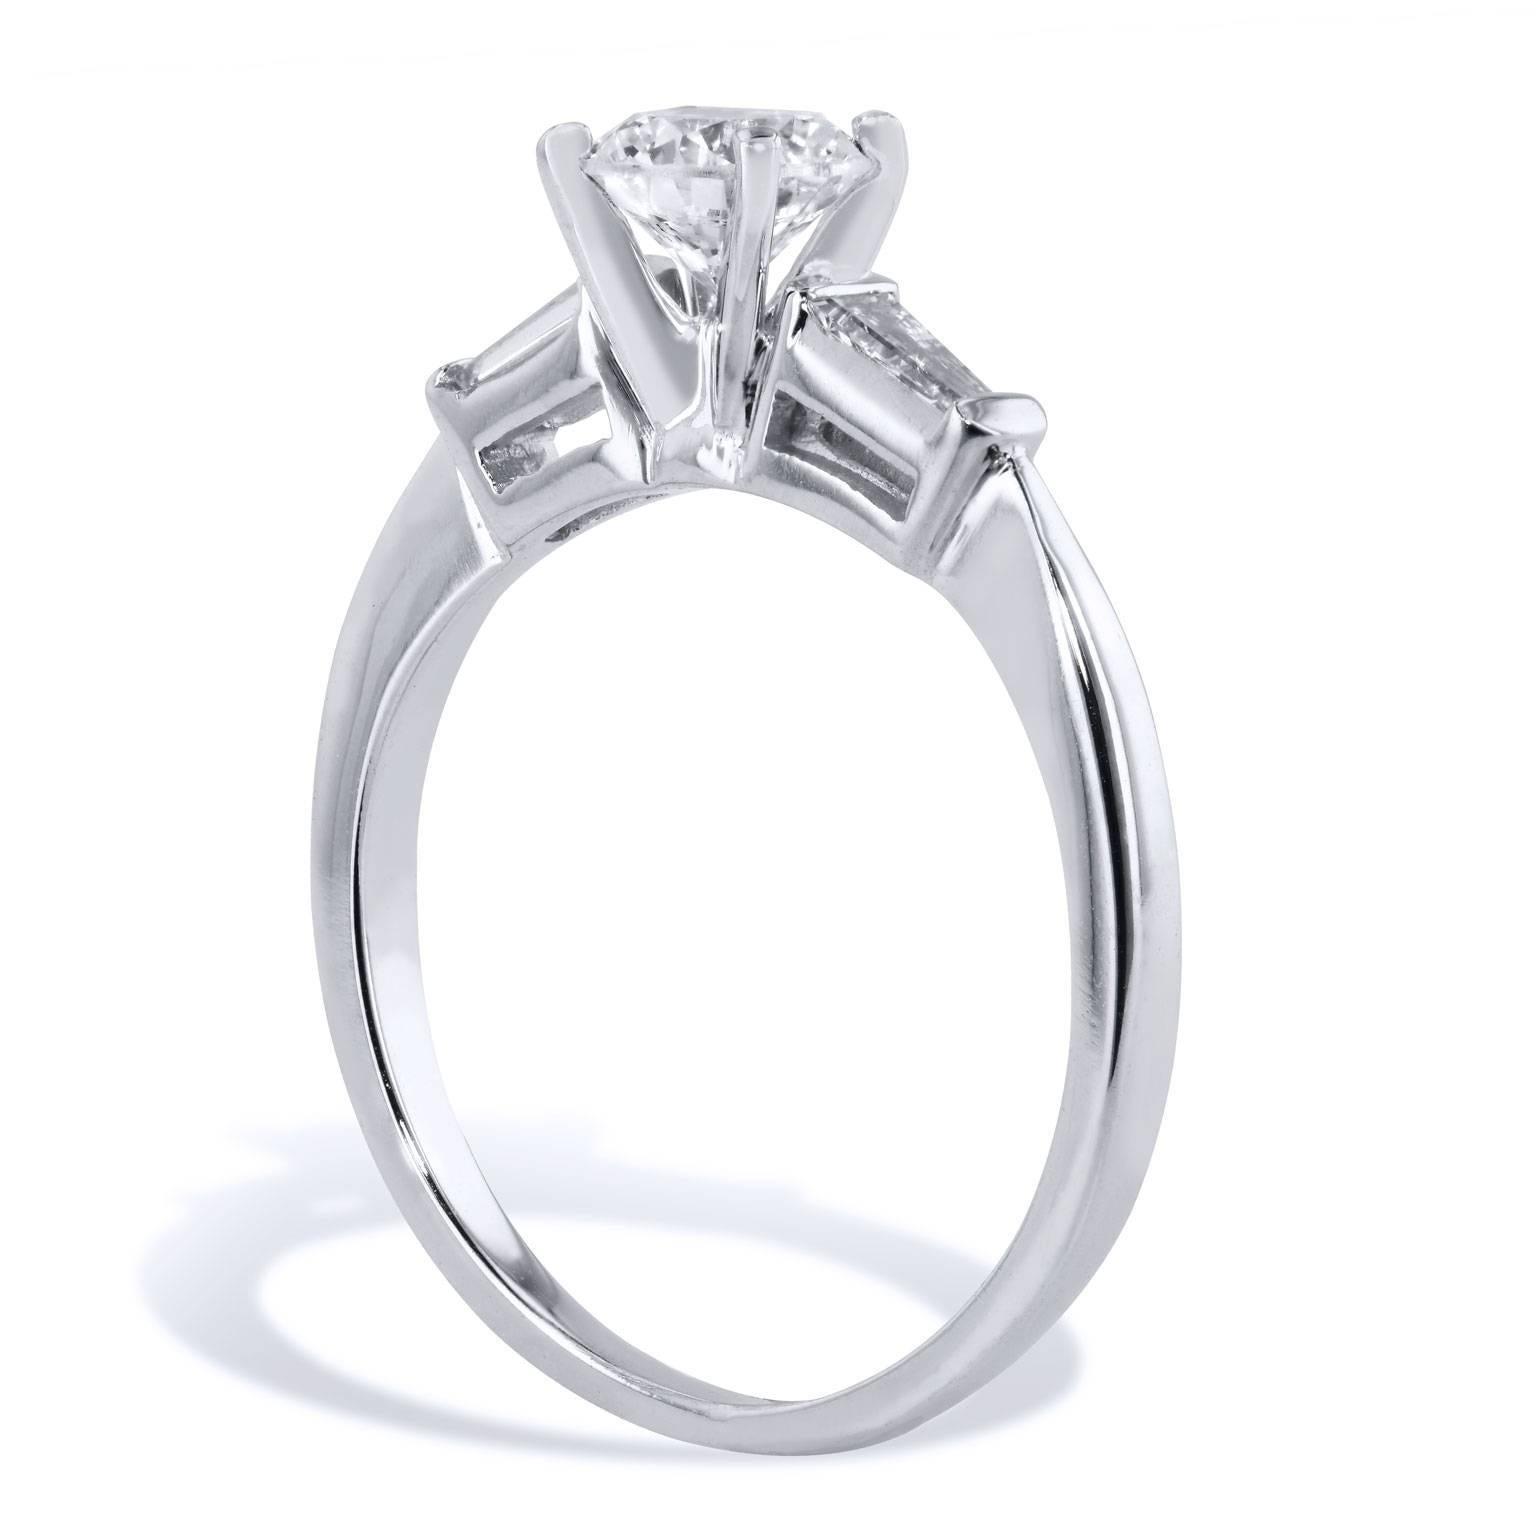 Leave her suspended in a dream with this beautiful H & H, handcrafted 14 karat white gold and diamond engagement ring. Two tapered baguette diamond side stones weighing a total of 0.20 carat (H/I/VS) draw the eye toward the lovely 0.64 carat diamond